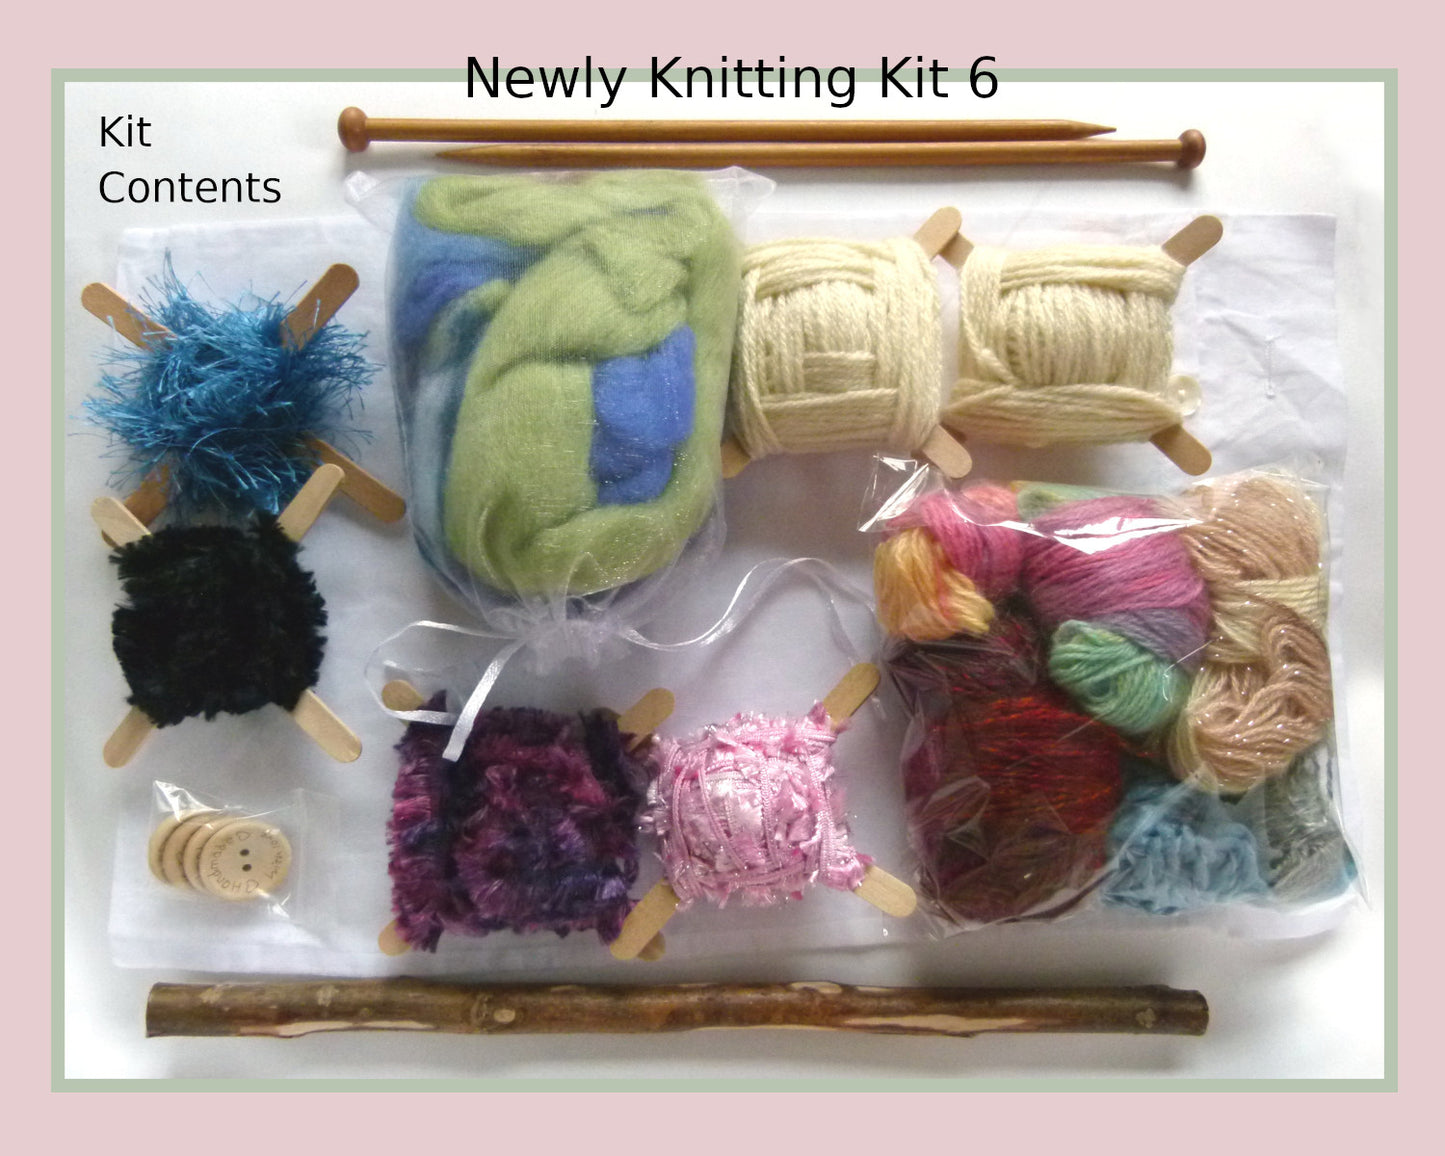 Newly Knitting Kit 6 - Out and About